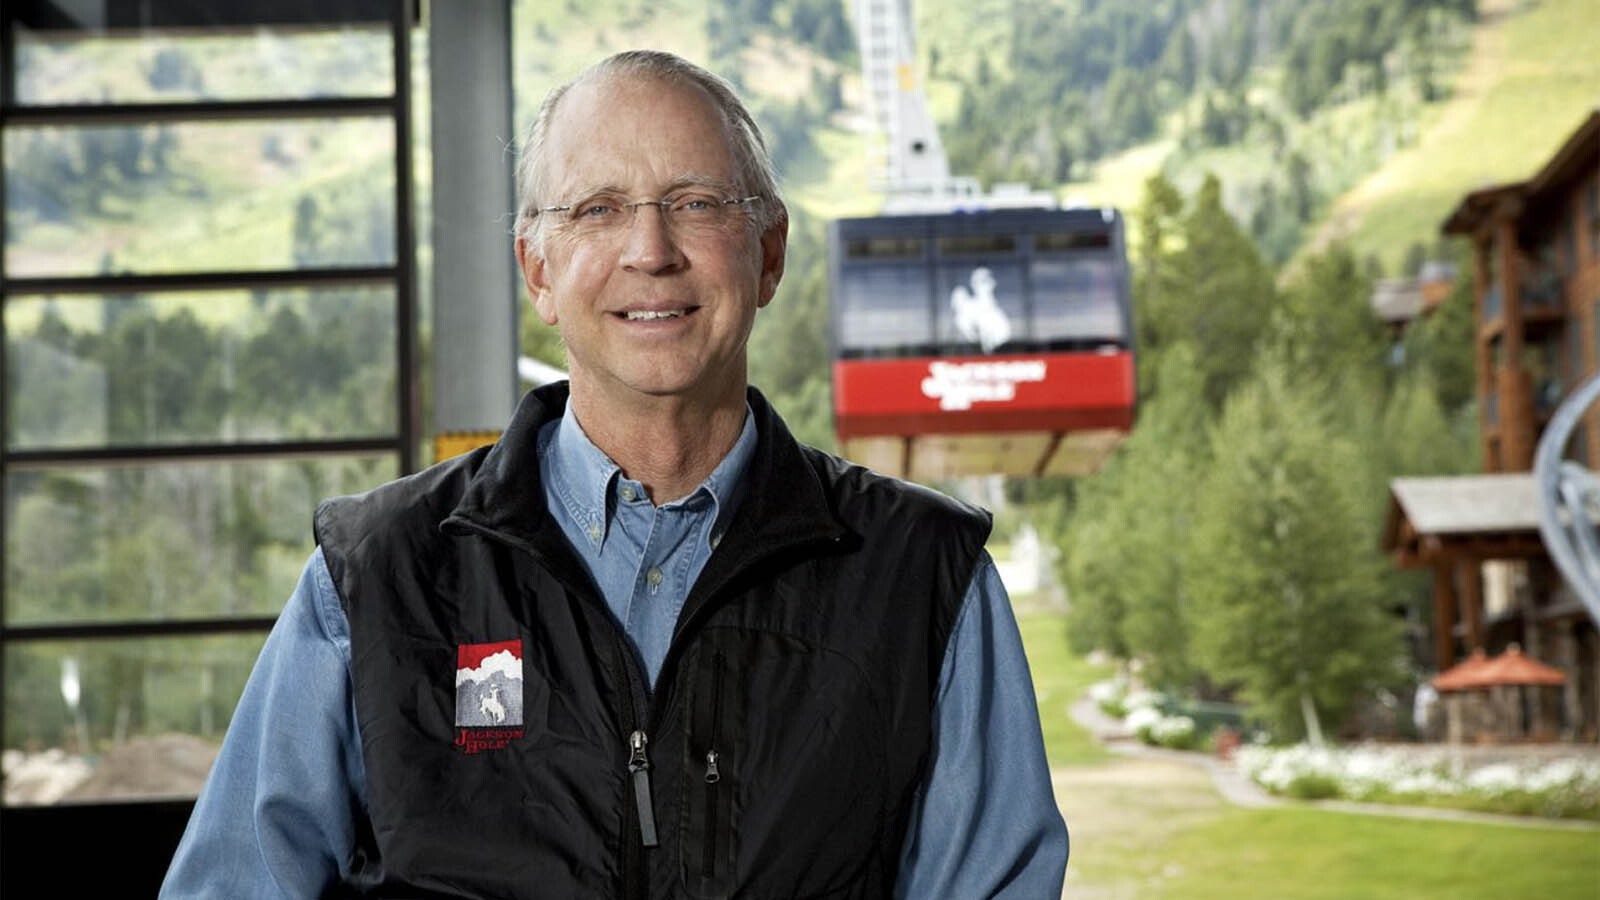 Jay Kemmerer owned Jackson Hole Mountain Resort for 32 years. He said he'll remain involved after selling the resort to a pair of Jackson Hole locals.